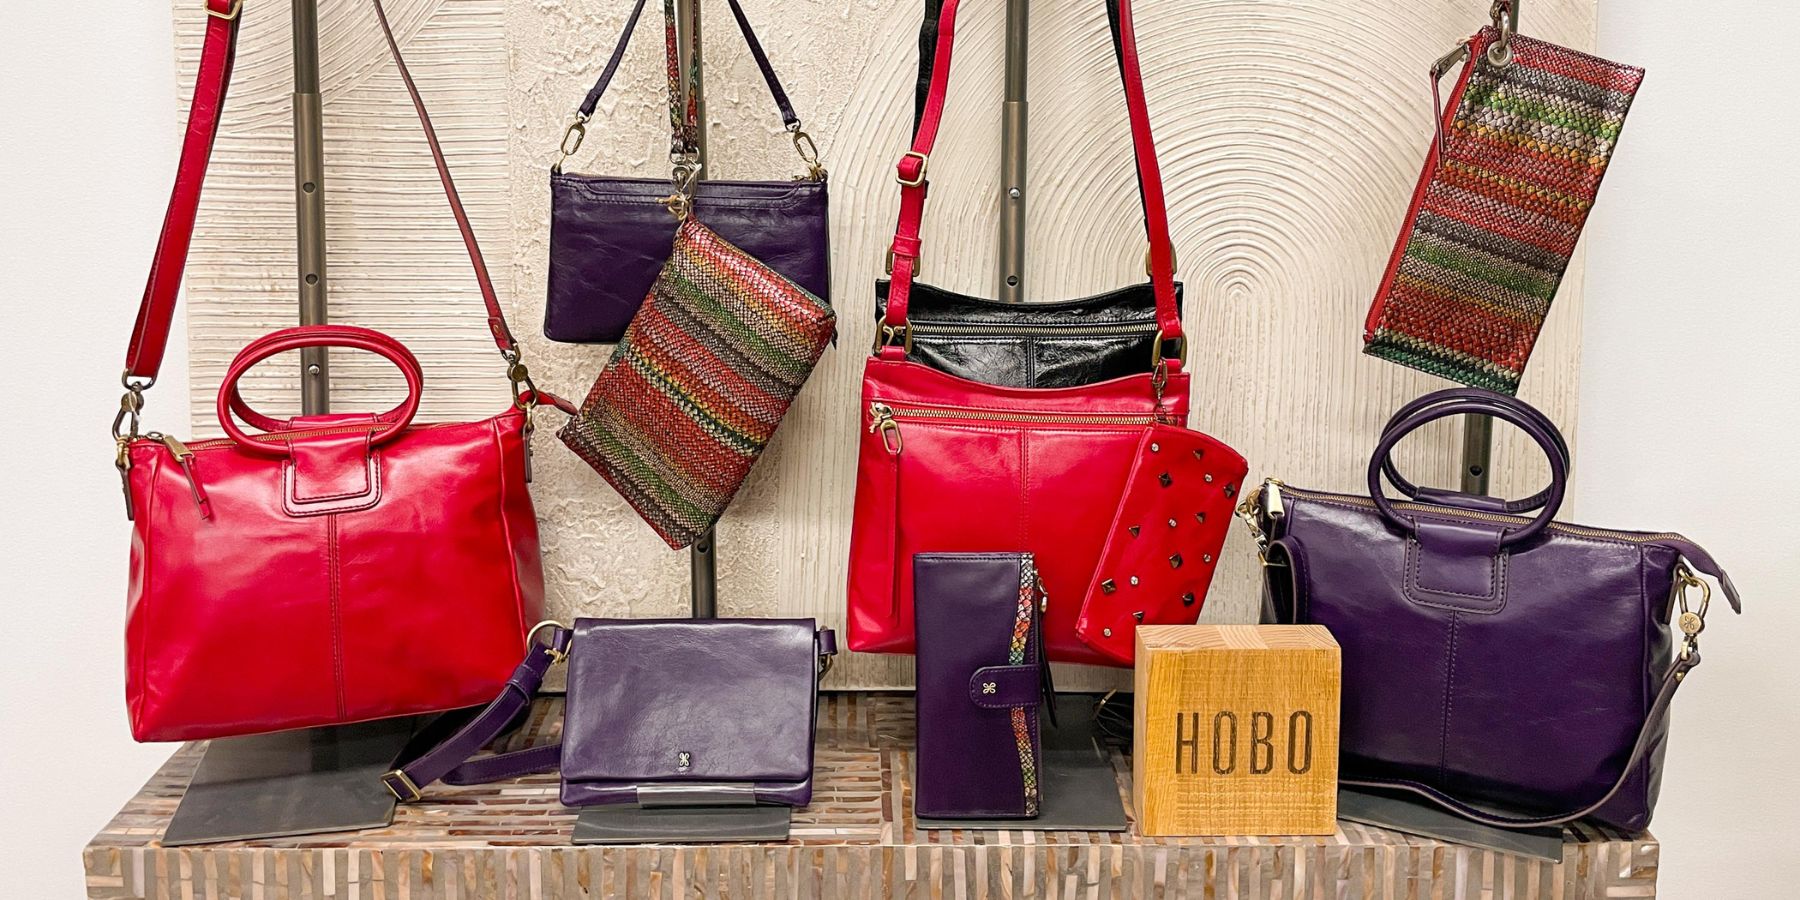 Hobo Leather Goods Deep Purple, Claret and Holiday Stripe